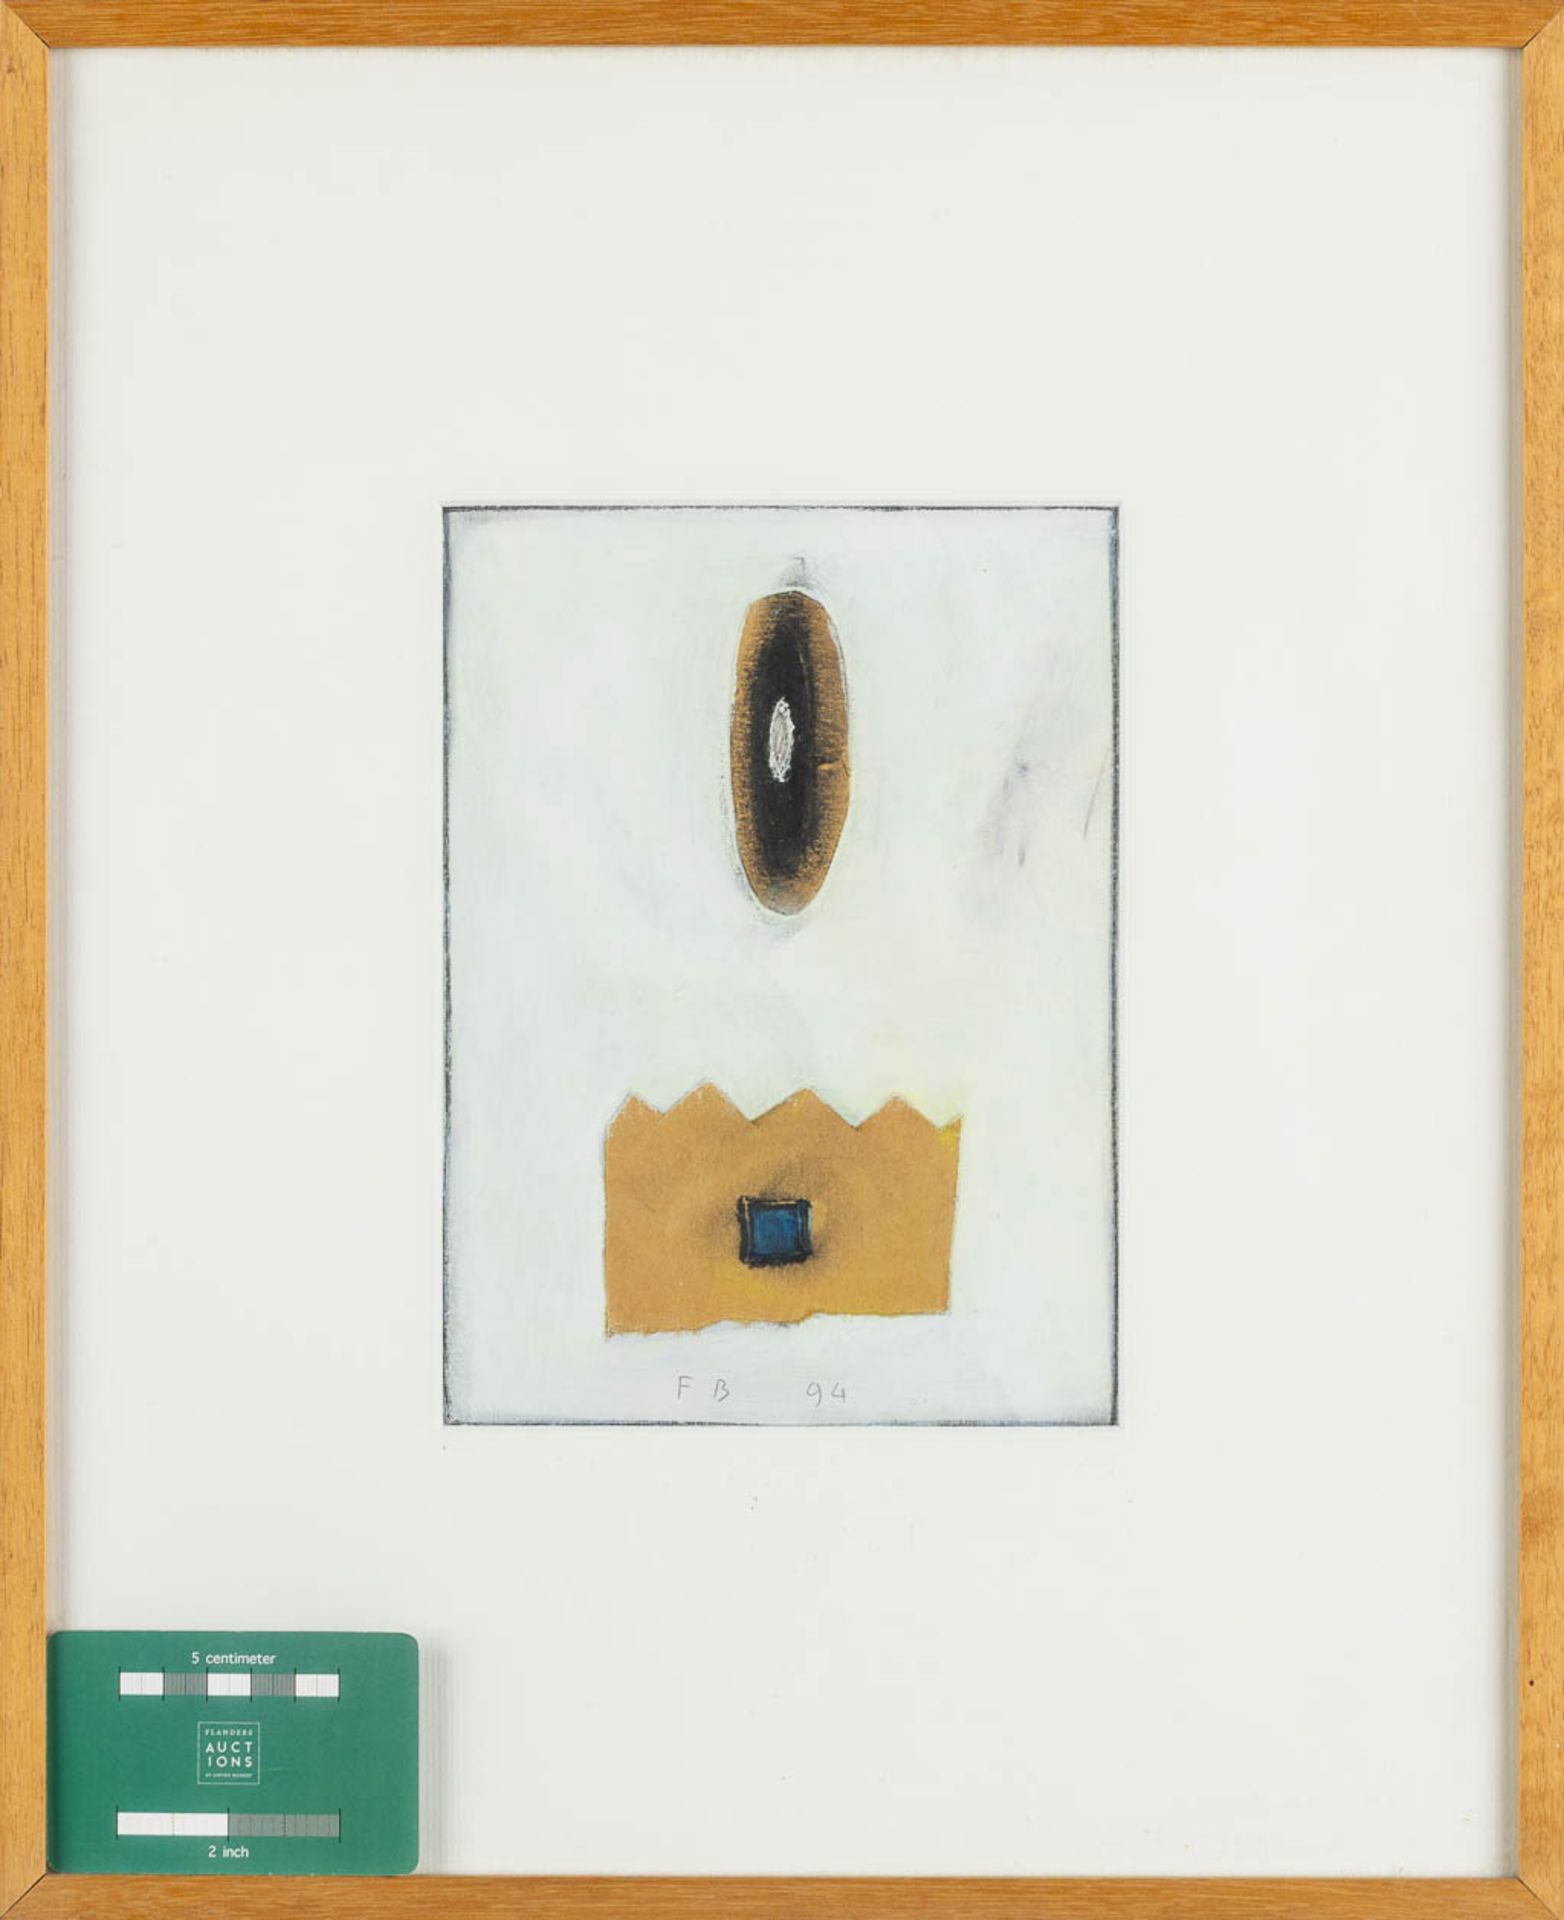 Fred BOFFIN (1946) 'Untitled' an abstract, oil on paper. 1994. (W:15,5 x H:21 cm) - Image 2 of 6